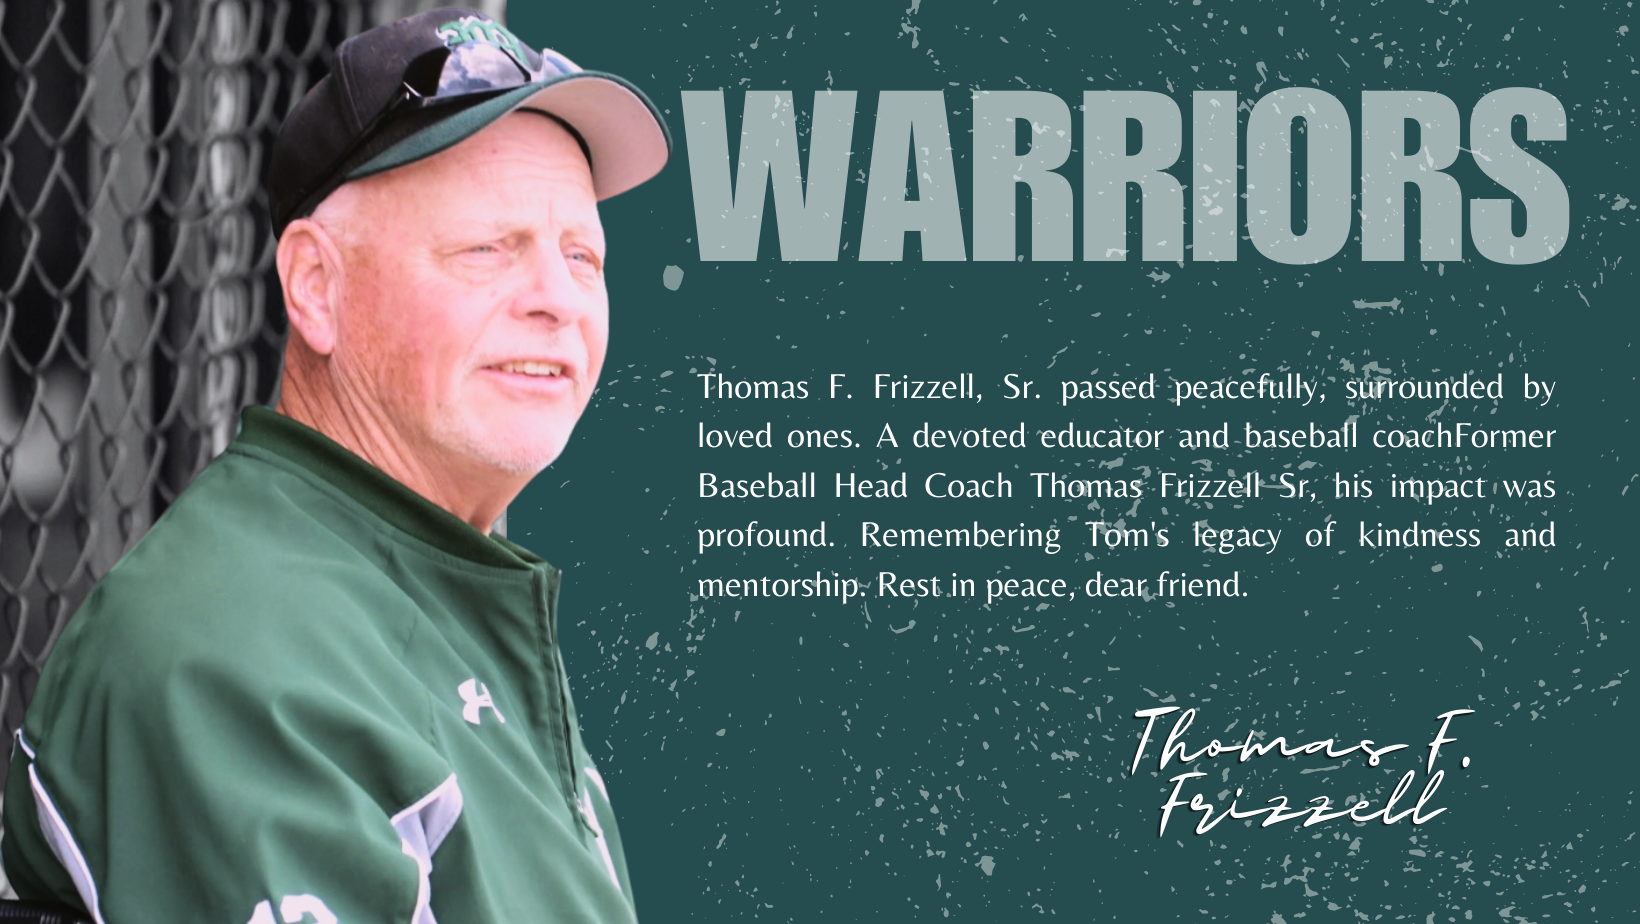 Massasoit Community College remembers faculty and former Baseball Head Coach Thomas Frizzell